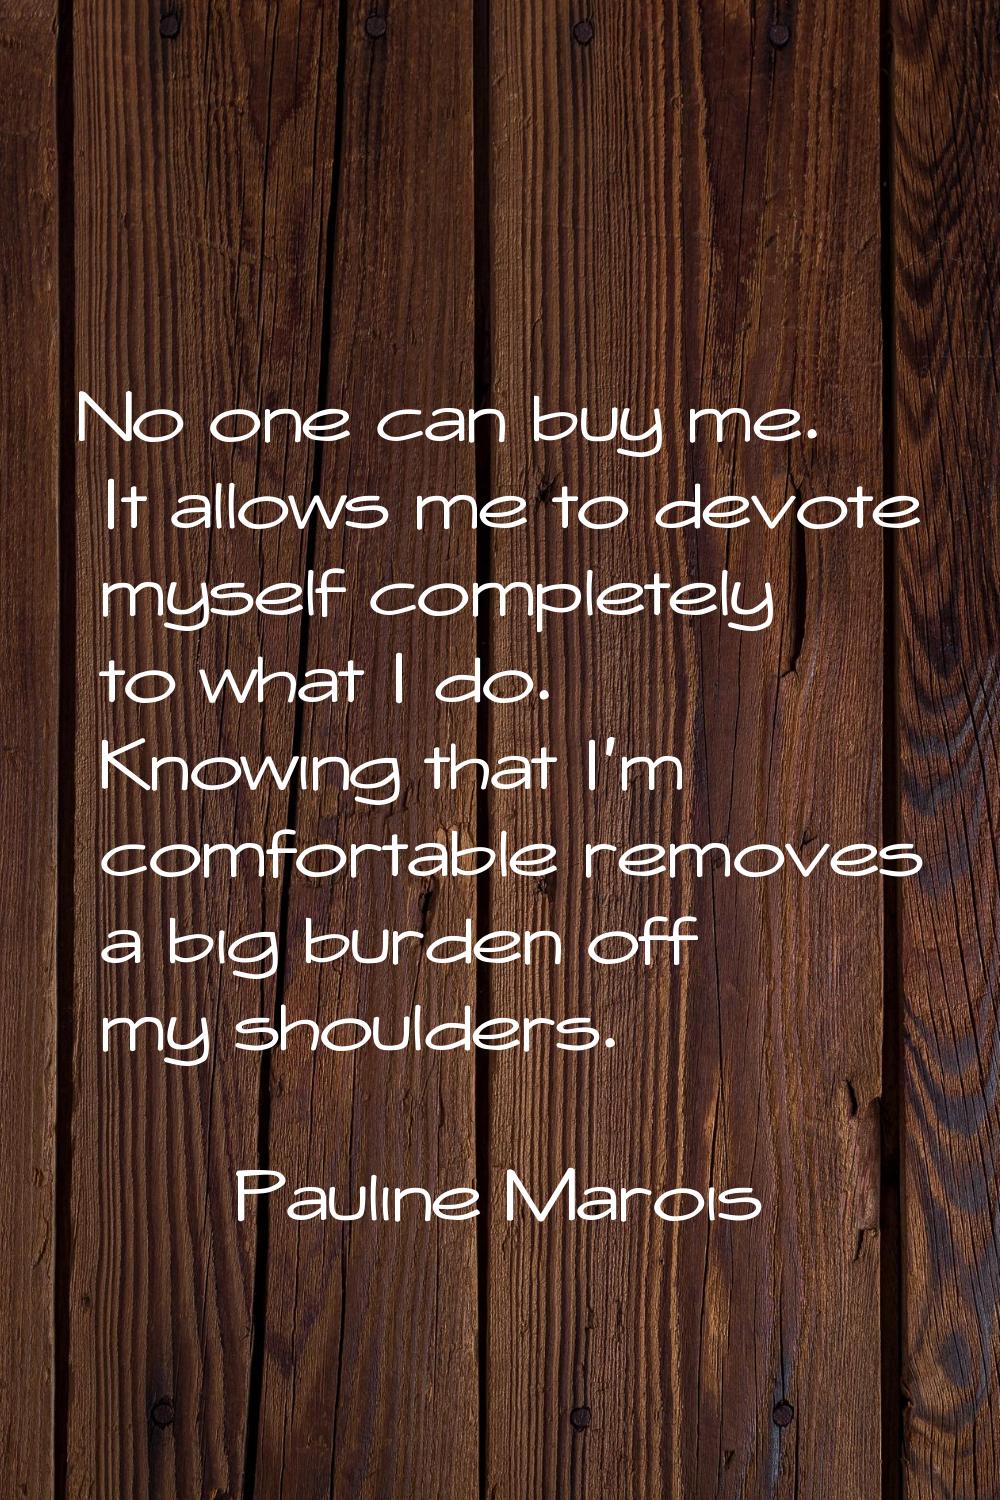 No one can buy me. It allows me to devote myself completely to what I do. Knowing that I'm comforta